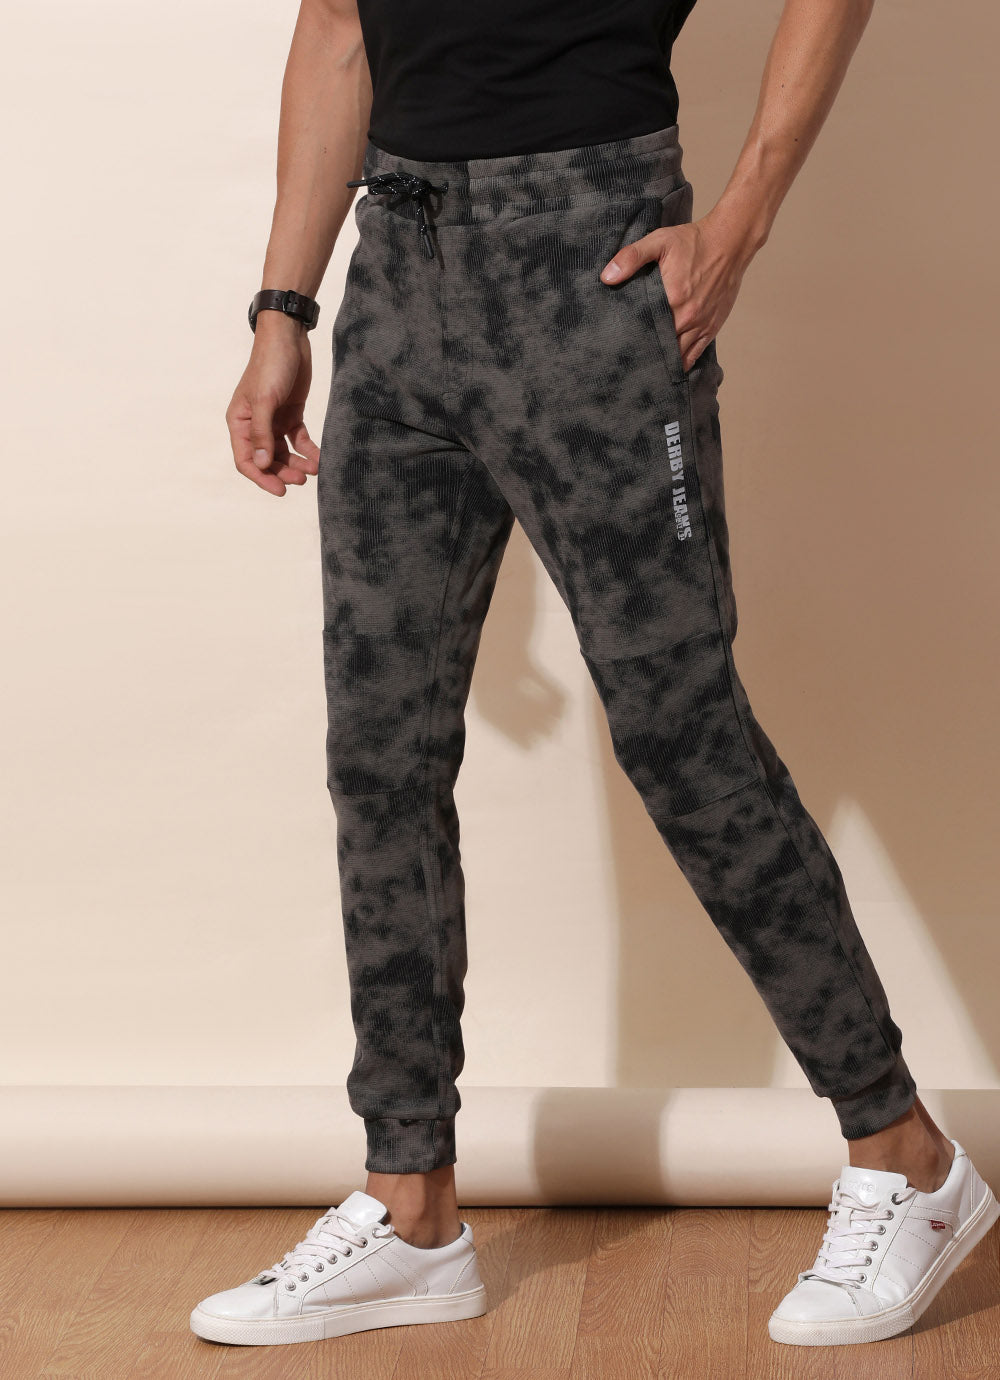 Hortone Black (Cotton Knitted Joggers- Featuring Side Pocket With A Zip And A Stylish Flap For Extra Flair.)